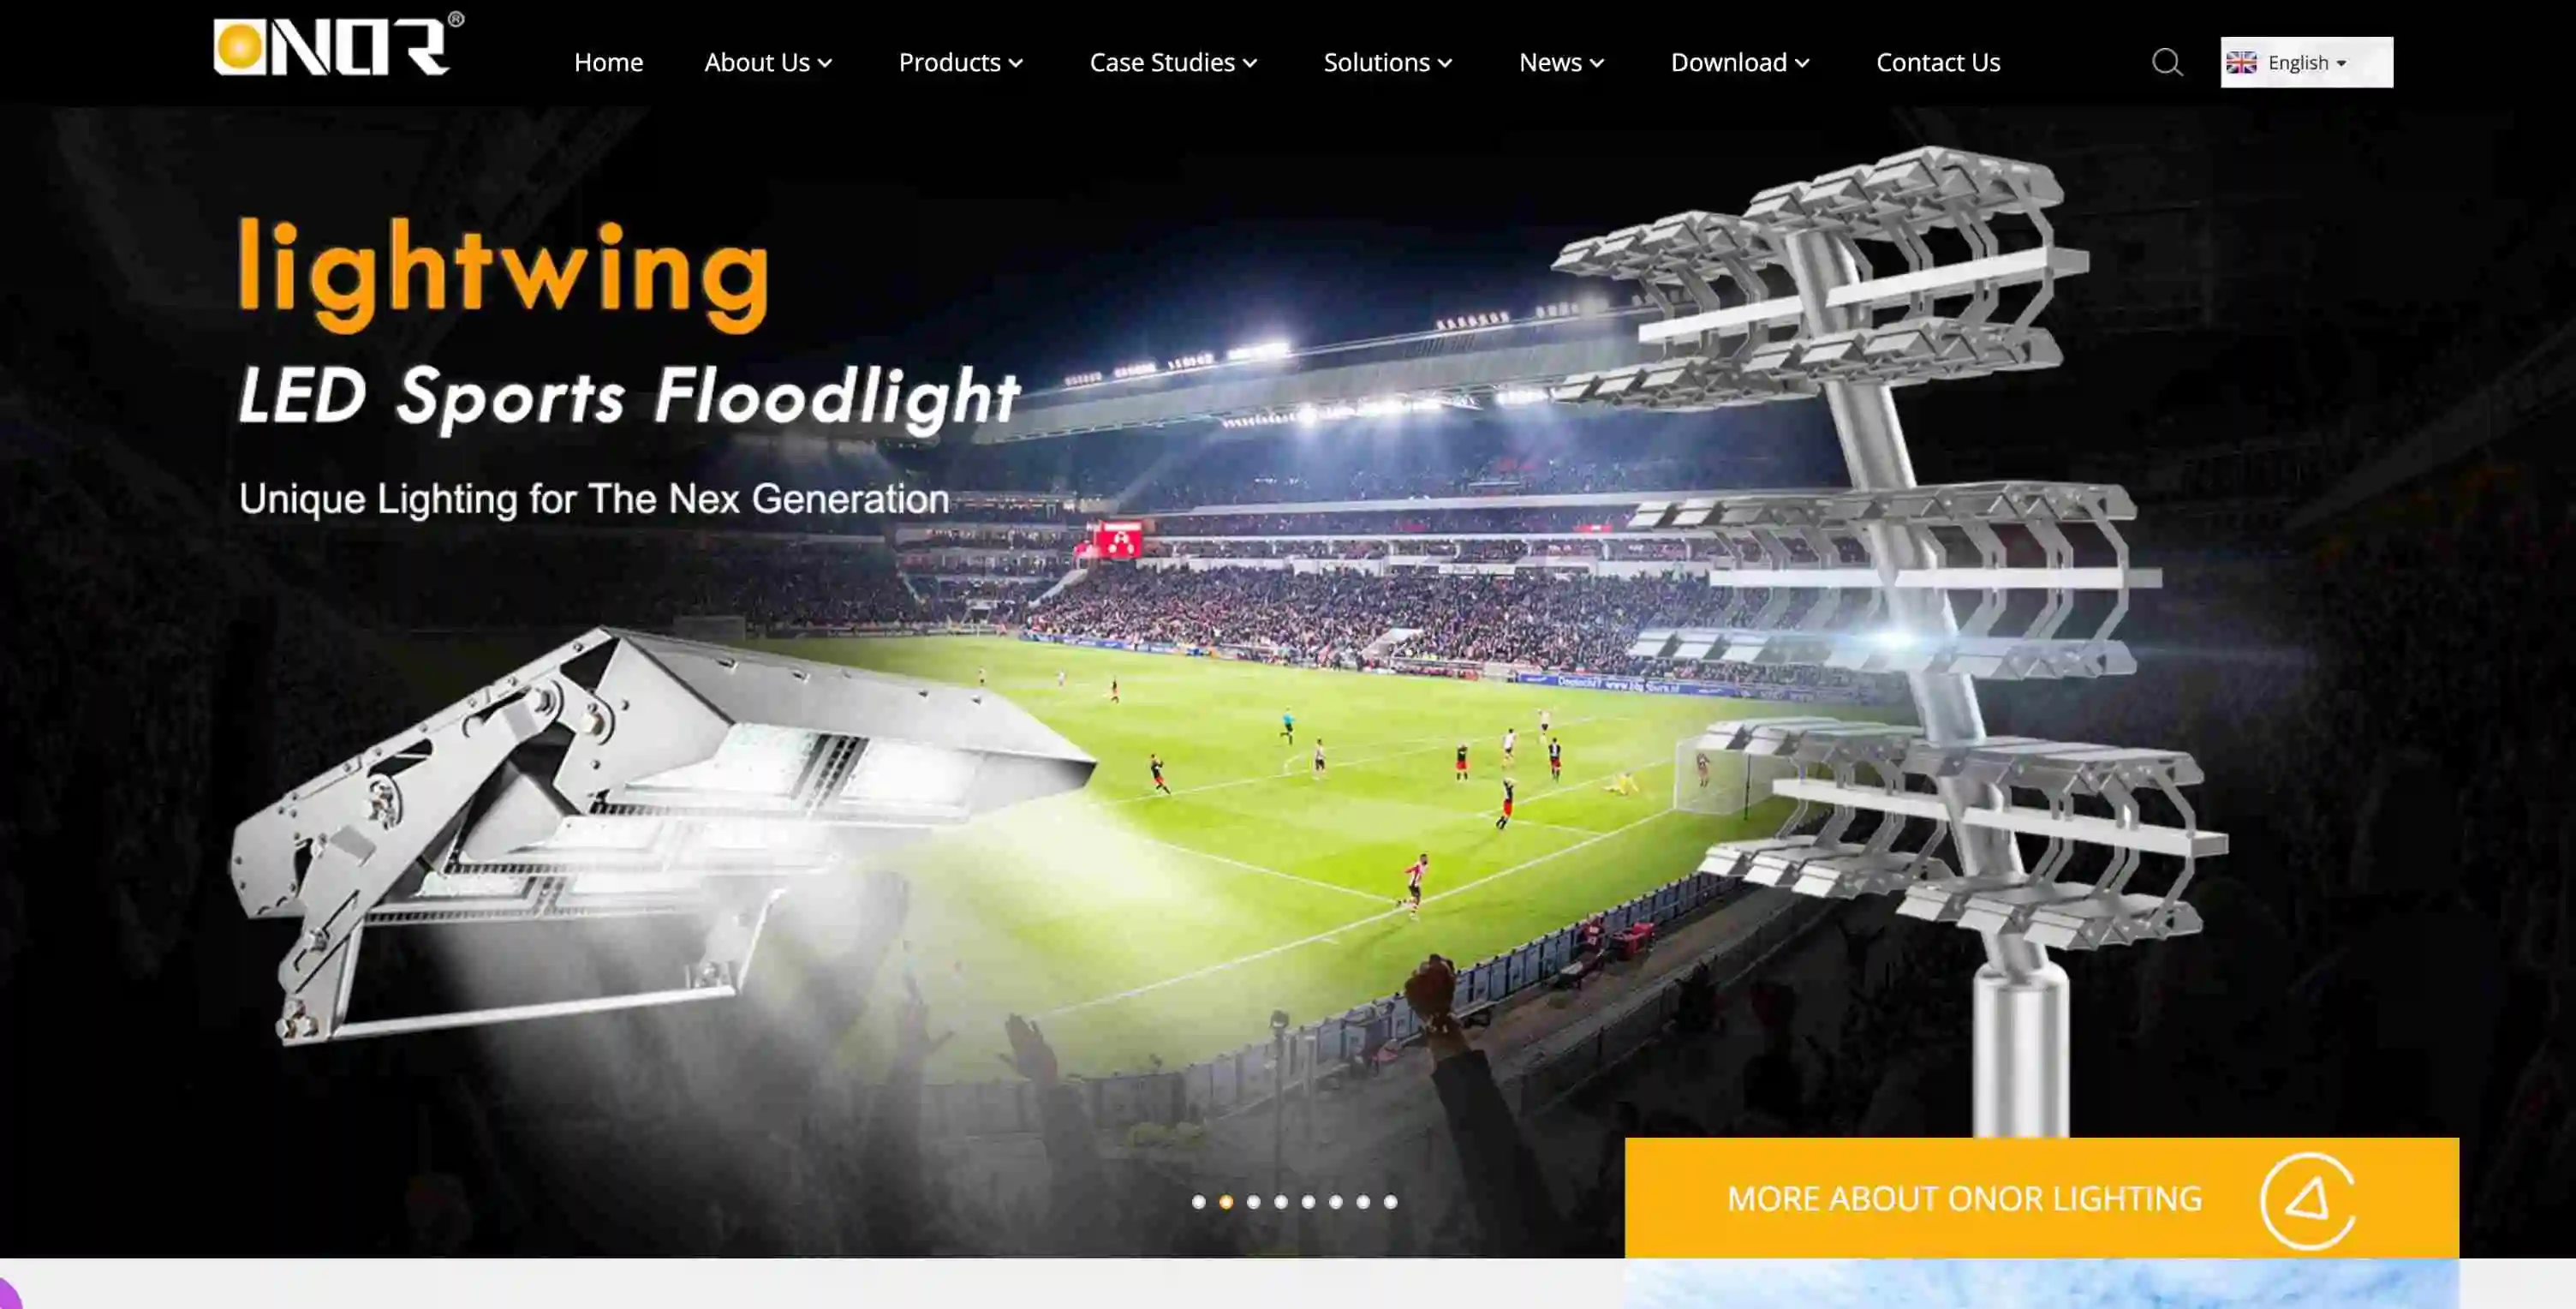 ONOR Lightings sports stadium website design showcasing dynamic visuals and interactive features